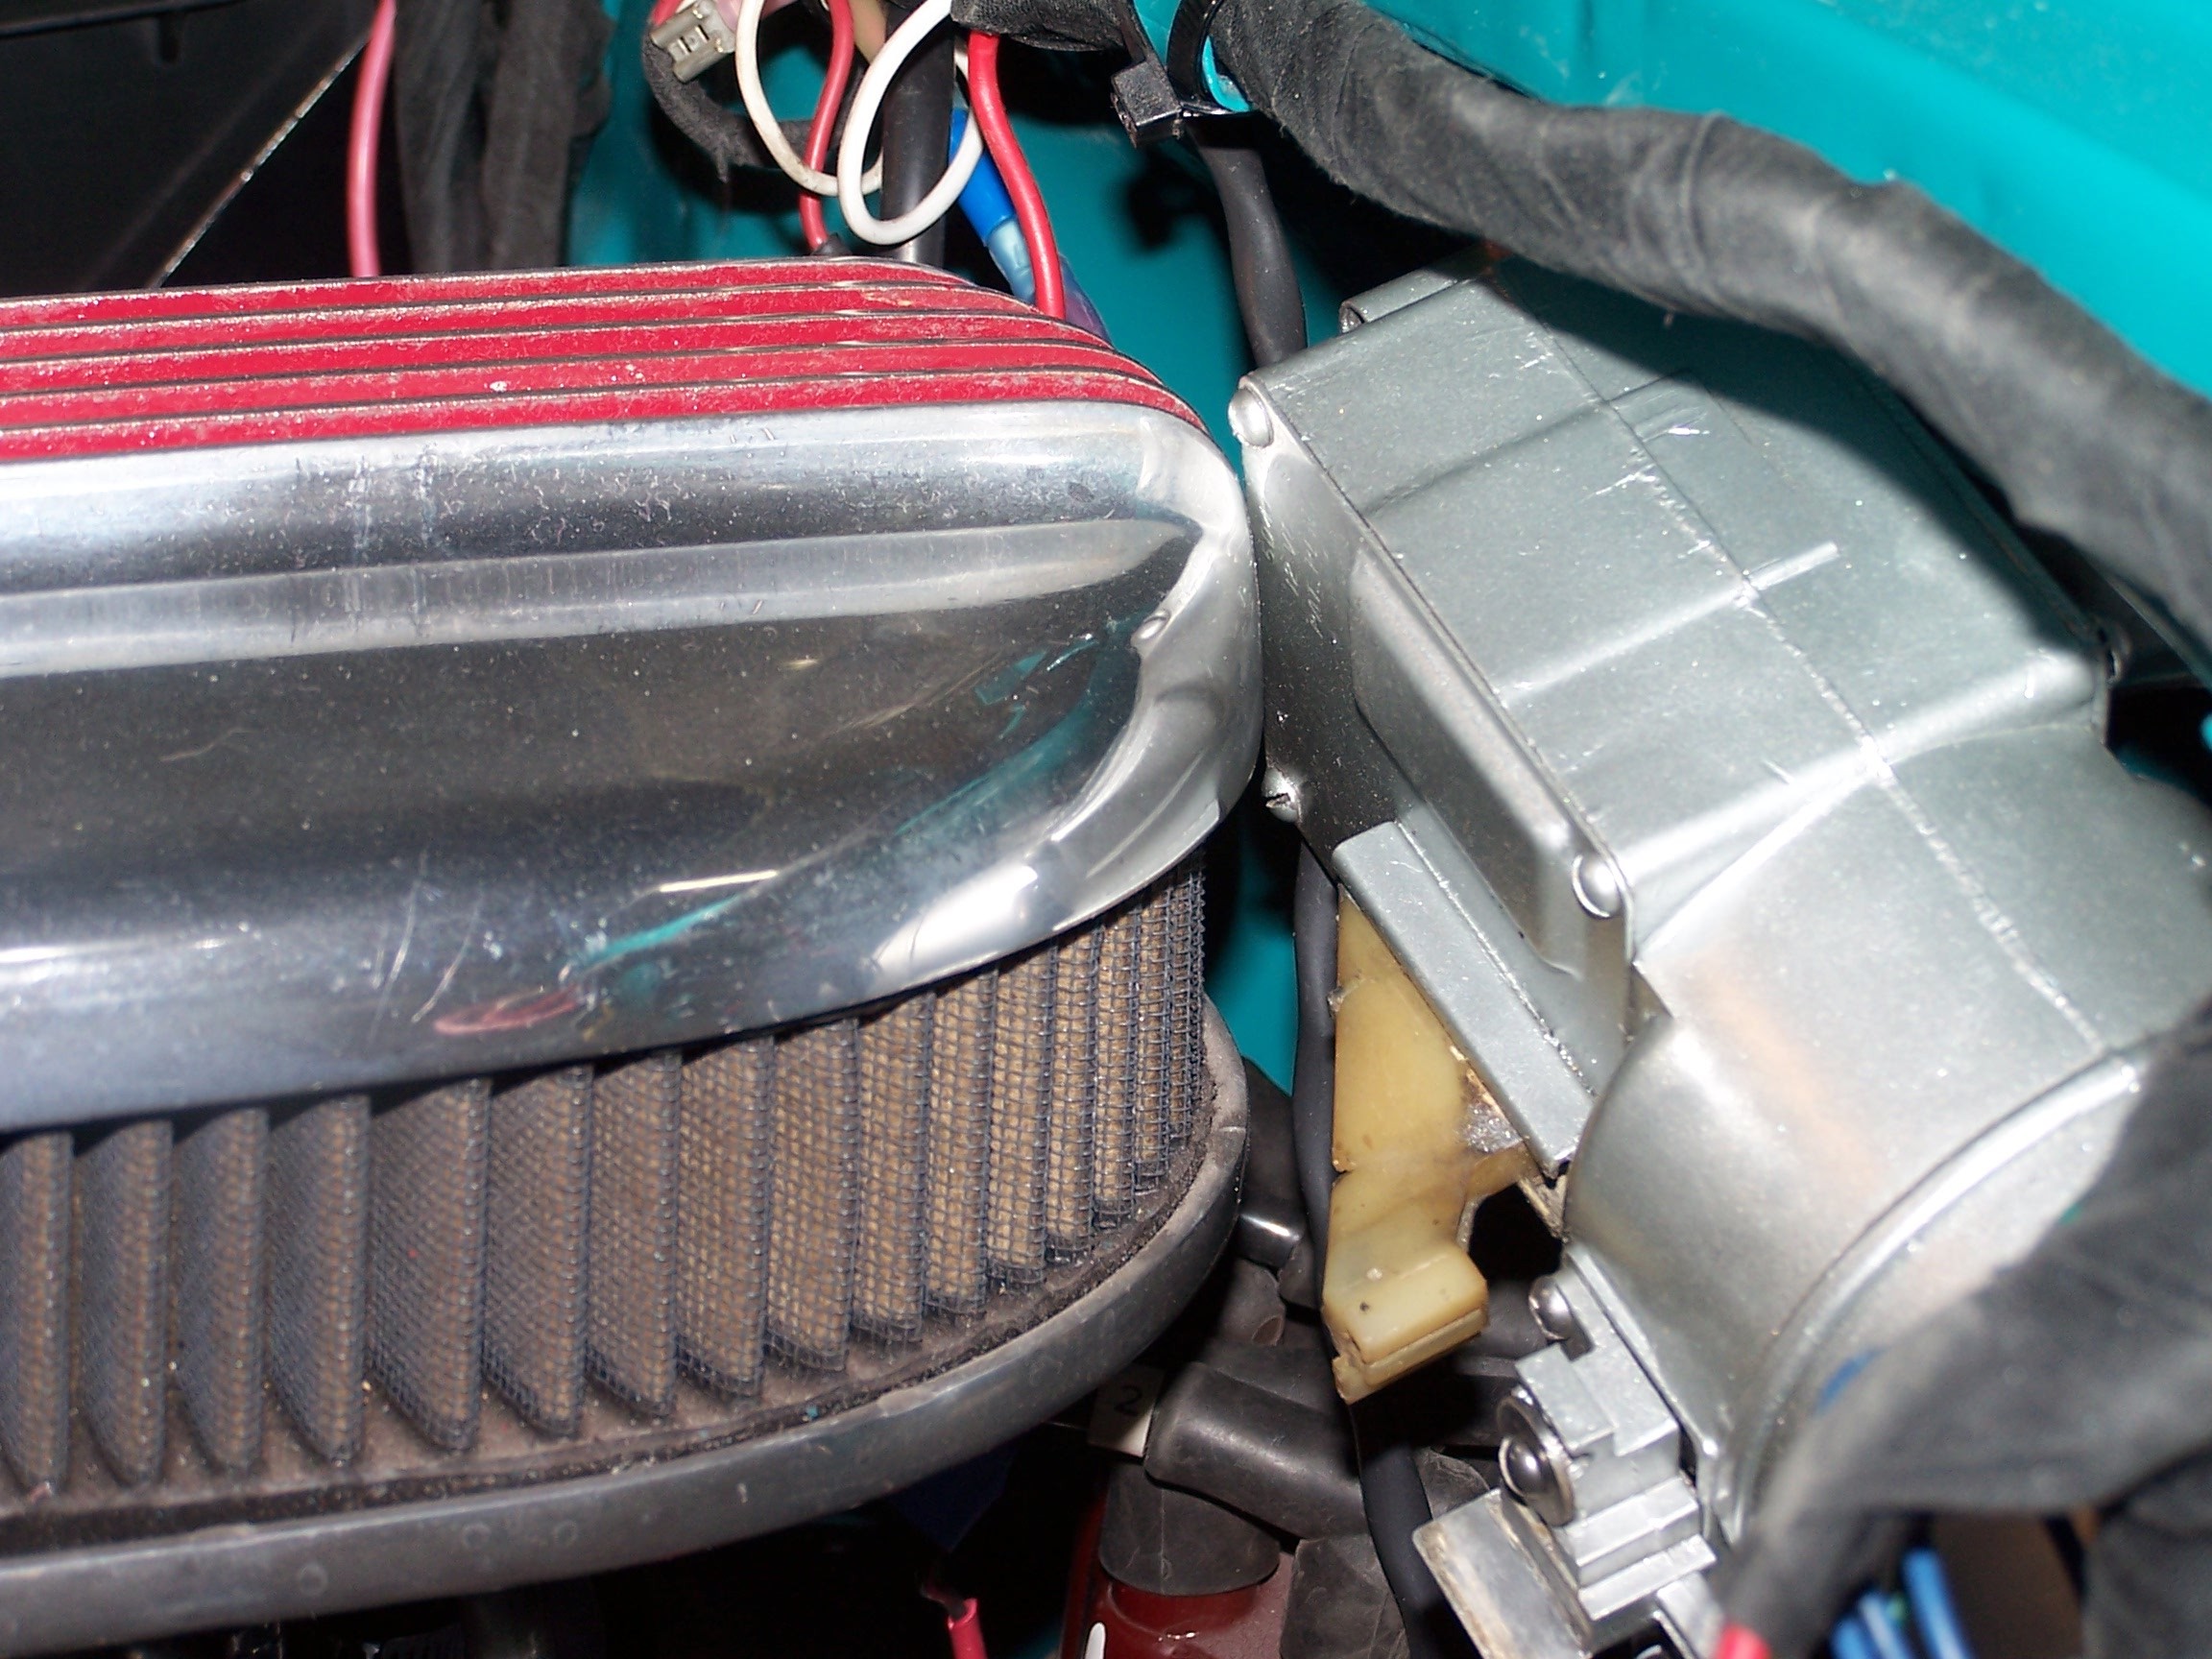 Clearance problem with aircleaner and wiper motor